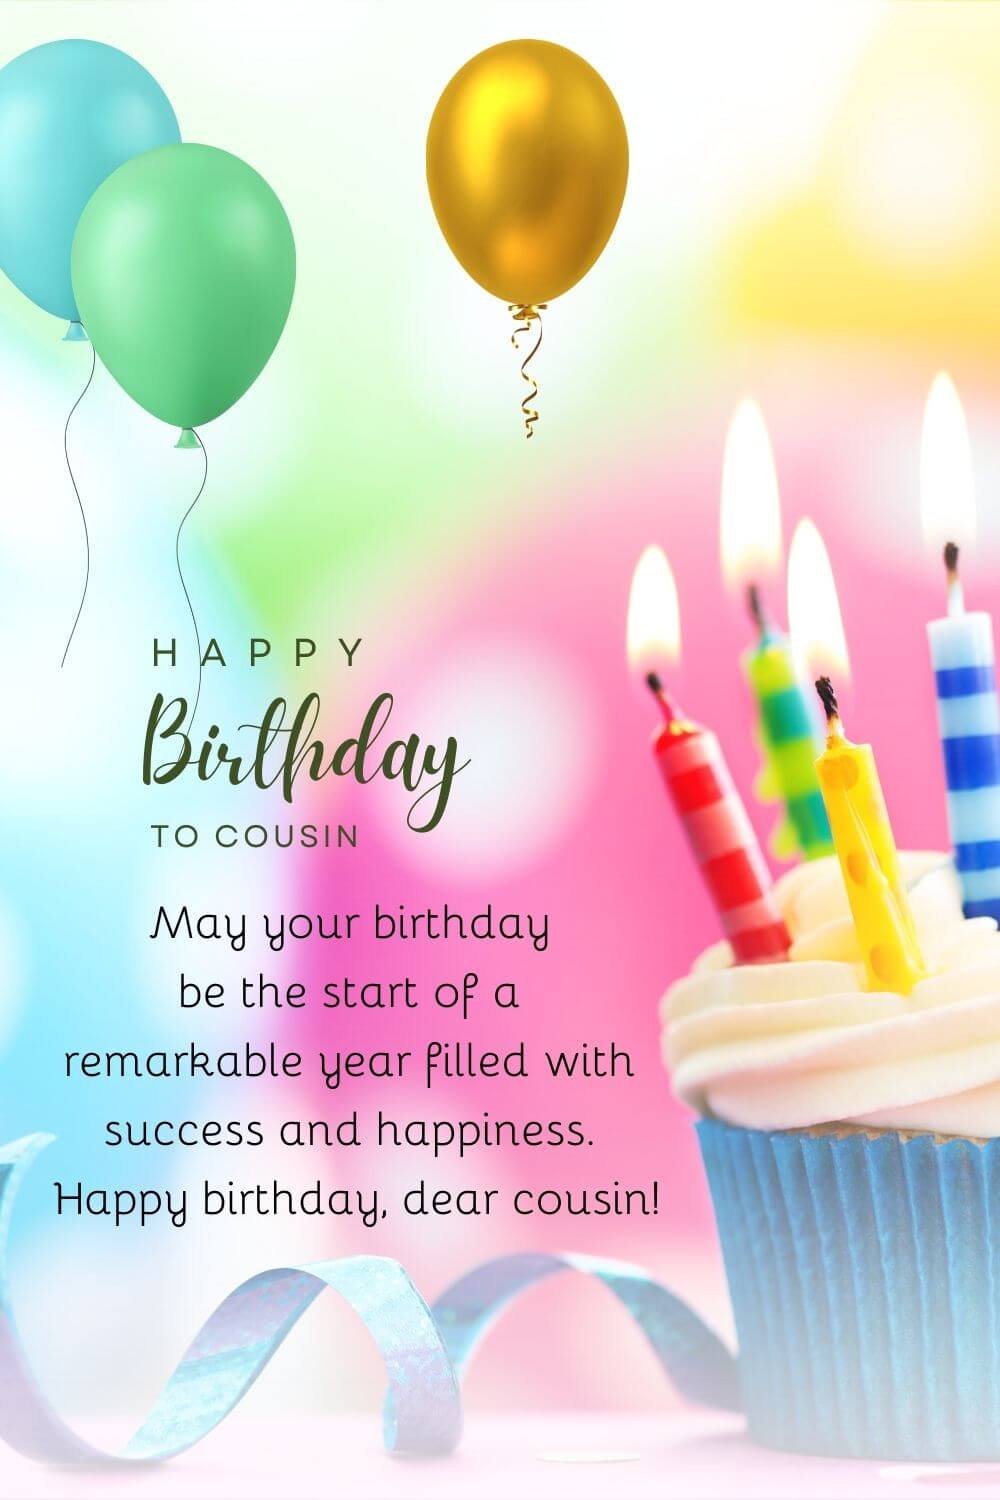 birthday beautiful wishes lines with image